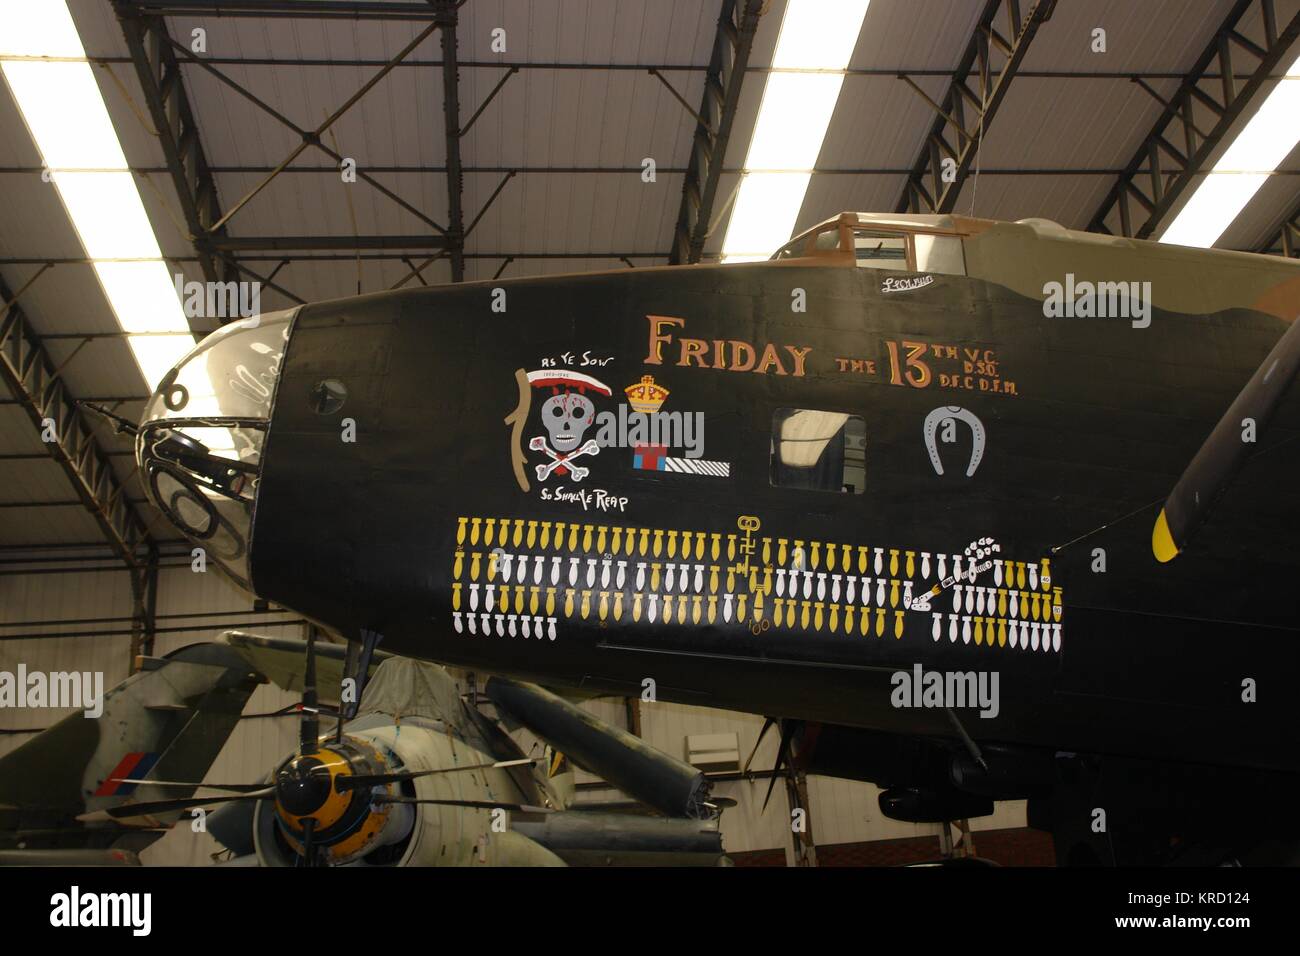 A Handley Page Halifax II fighter plane on display at the Elvington Air Museum near York.  It has 'Friday the 13th' and 'As ye sow, so shall ye reap' painted on the side, together with the number of bombs dropped on enemy territory.       Date: April 2009 Stock Photo